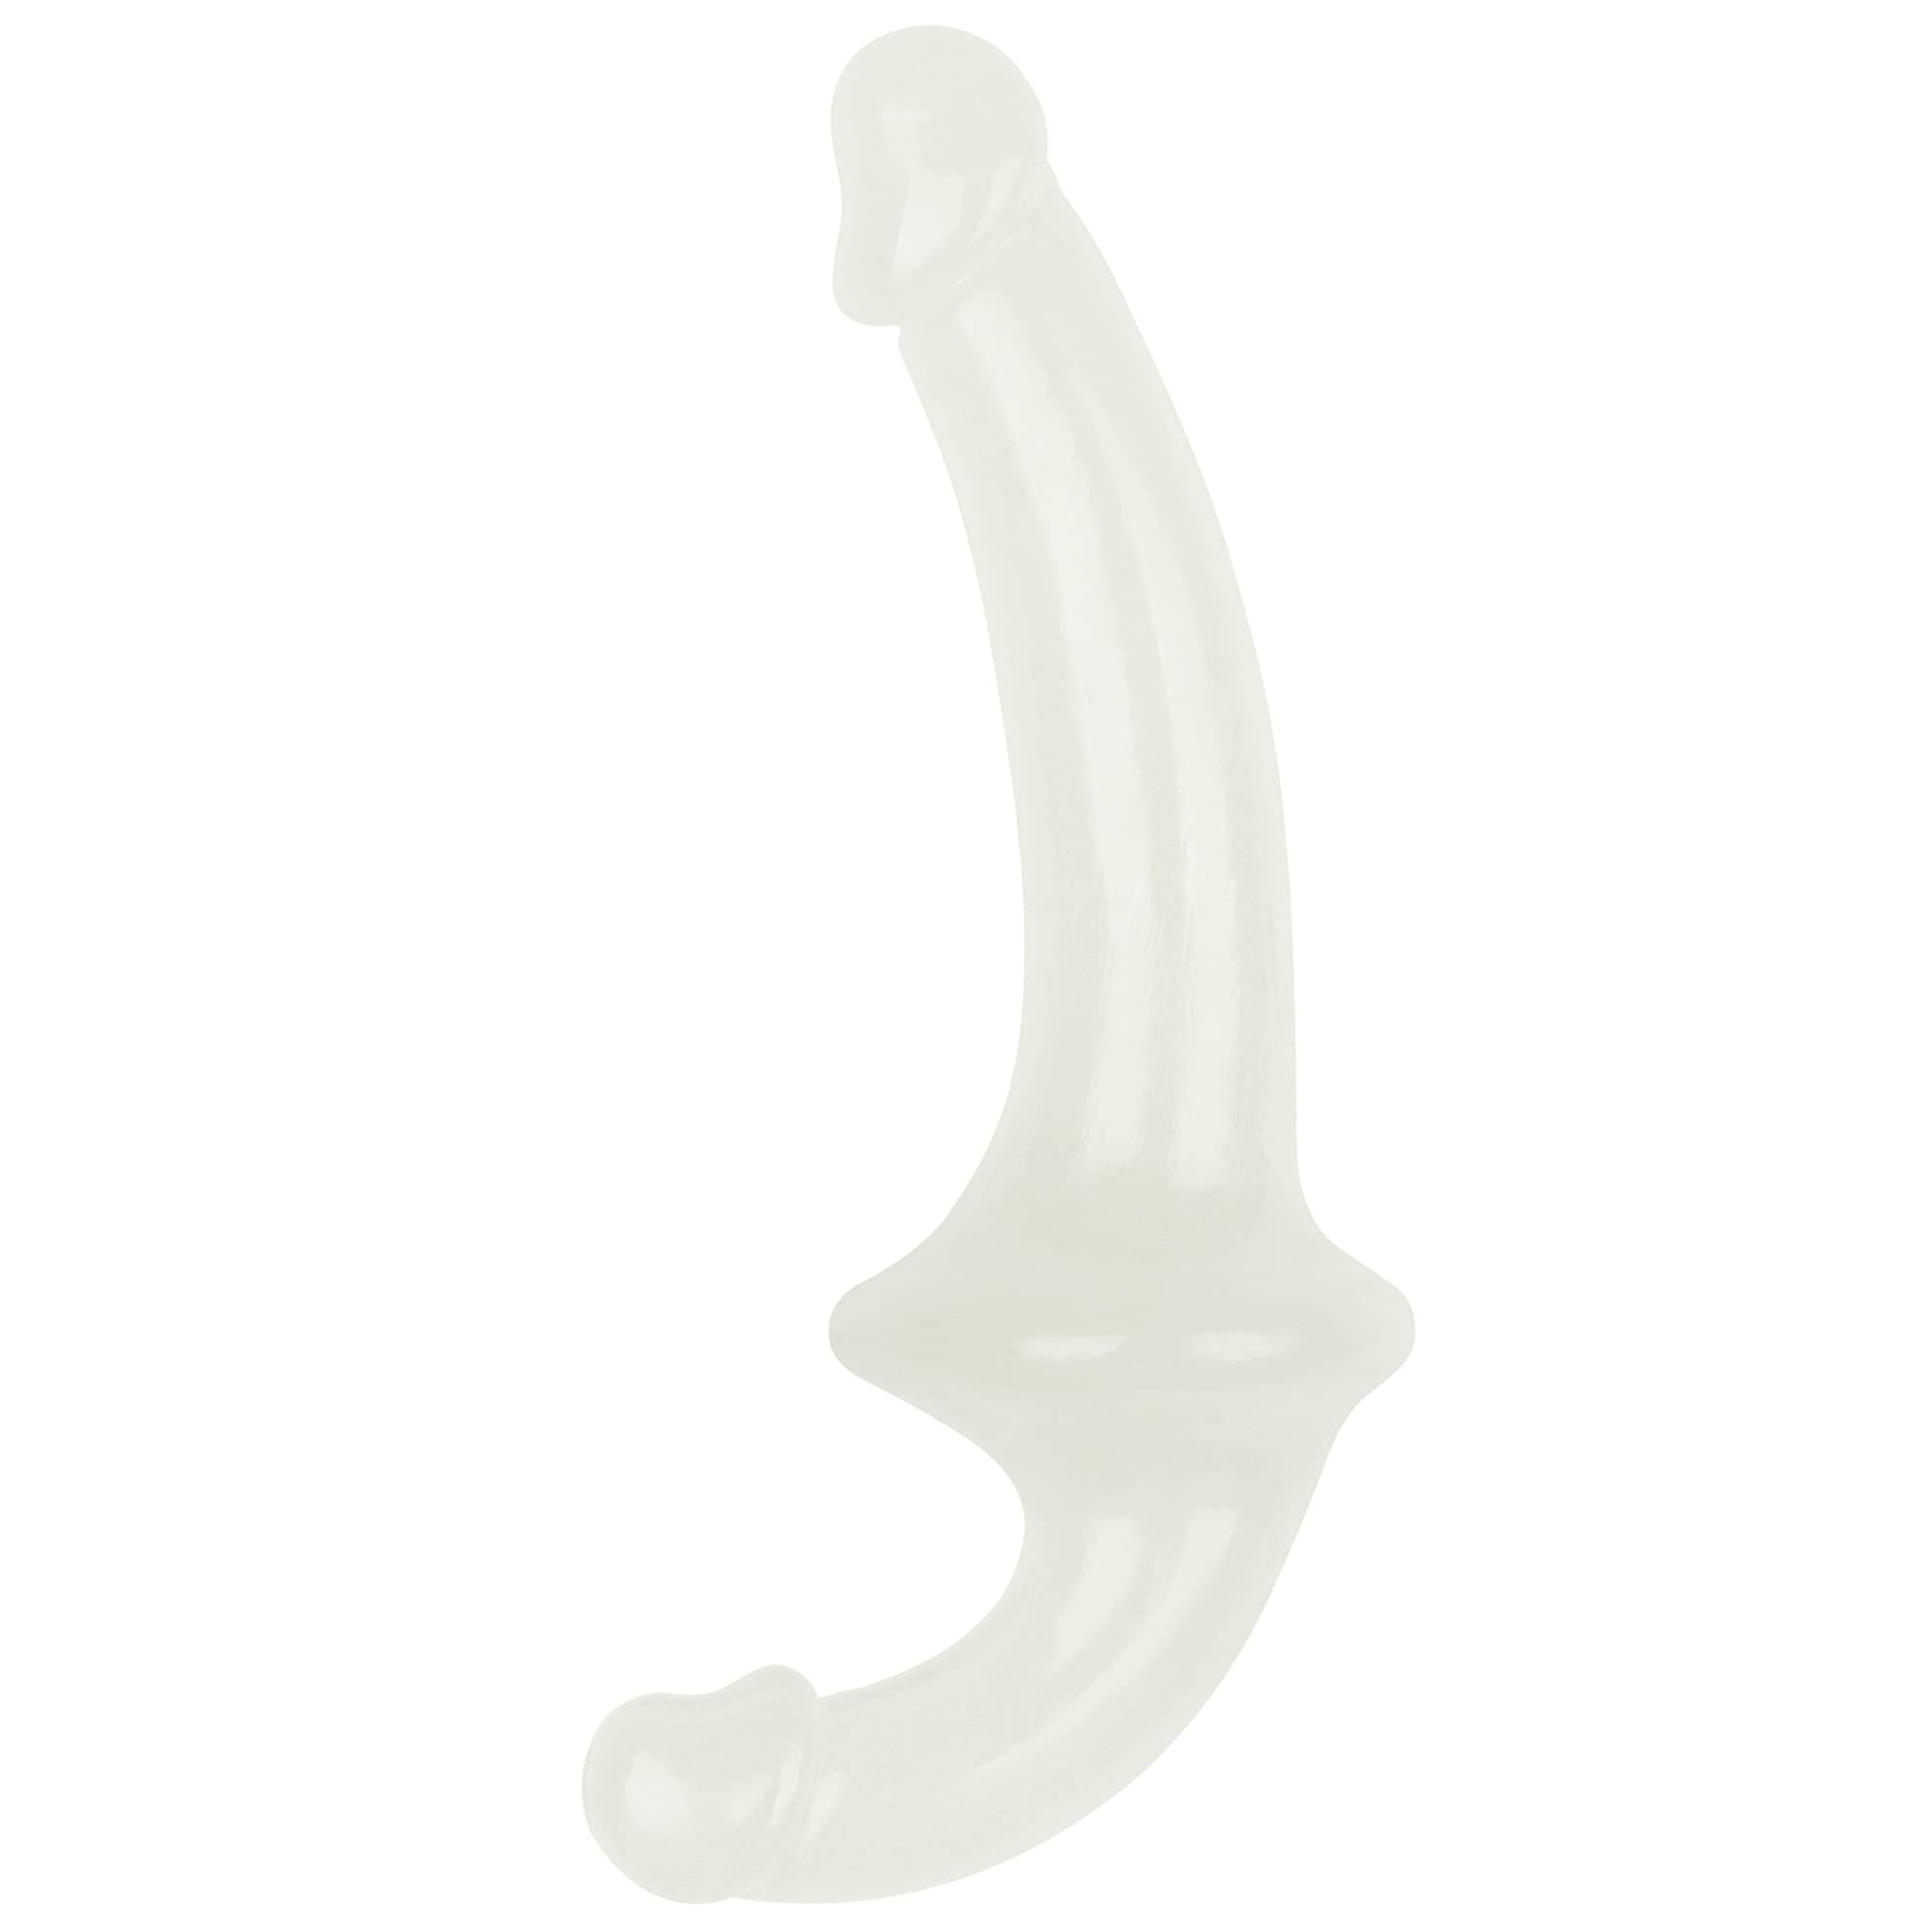 The 10.5 inches lumino play double dildo is upright